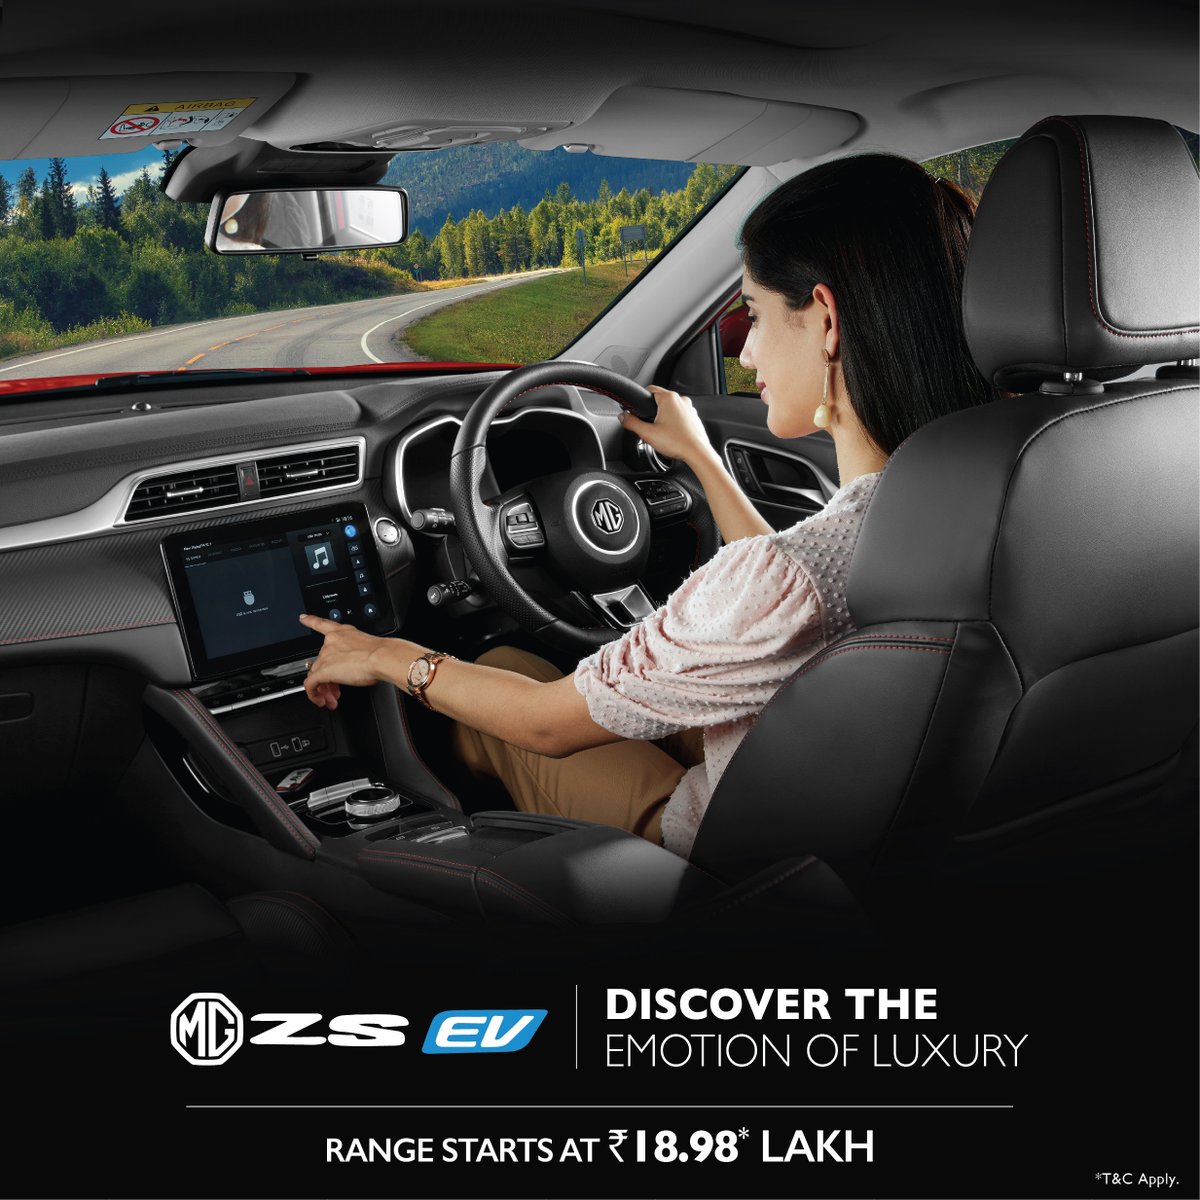 Explore a new emotion of luxury, refinement and comfort with MG ZS EV. Experience the exquisite with two interior theme options, plush seats, and spacious interiors. With a range of 461* KMS in a single charge, MG ZS EV is a class apart starting at an amazing price of ₹18.98*